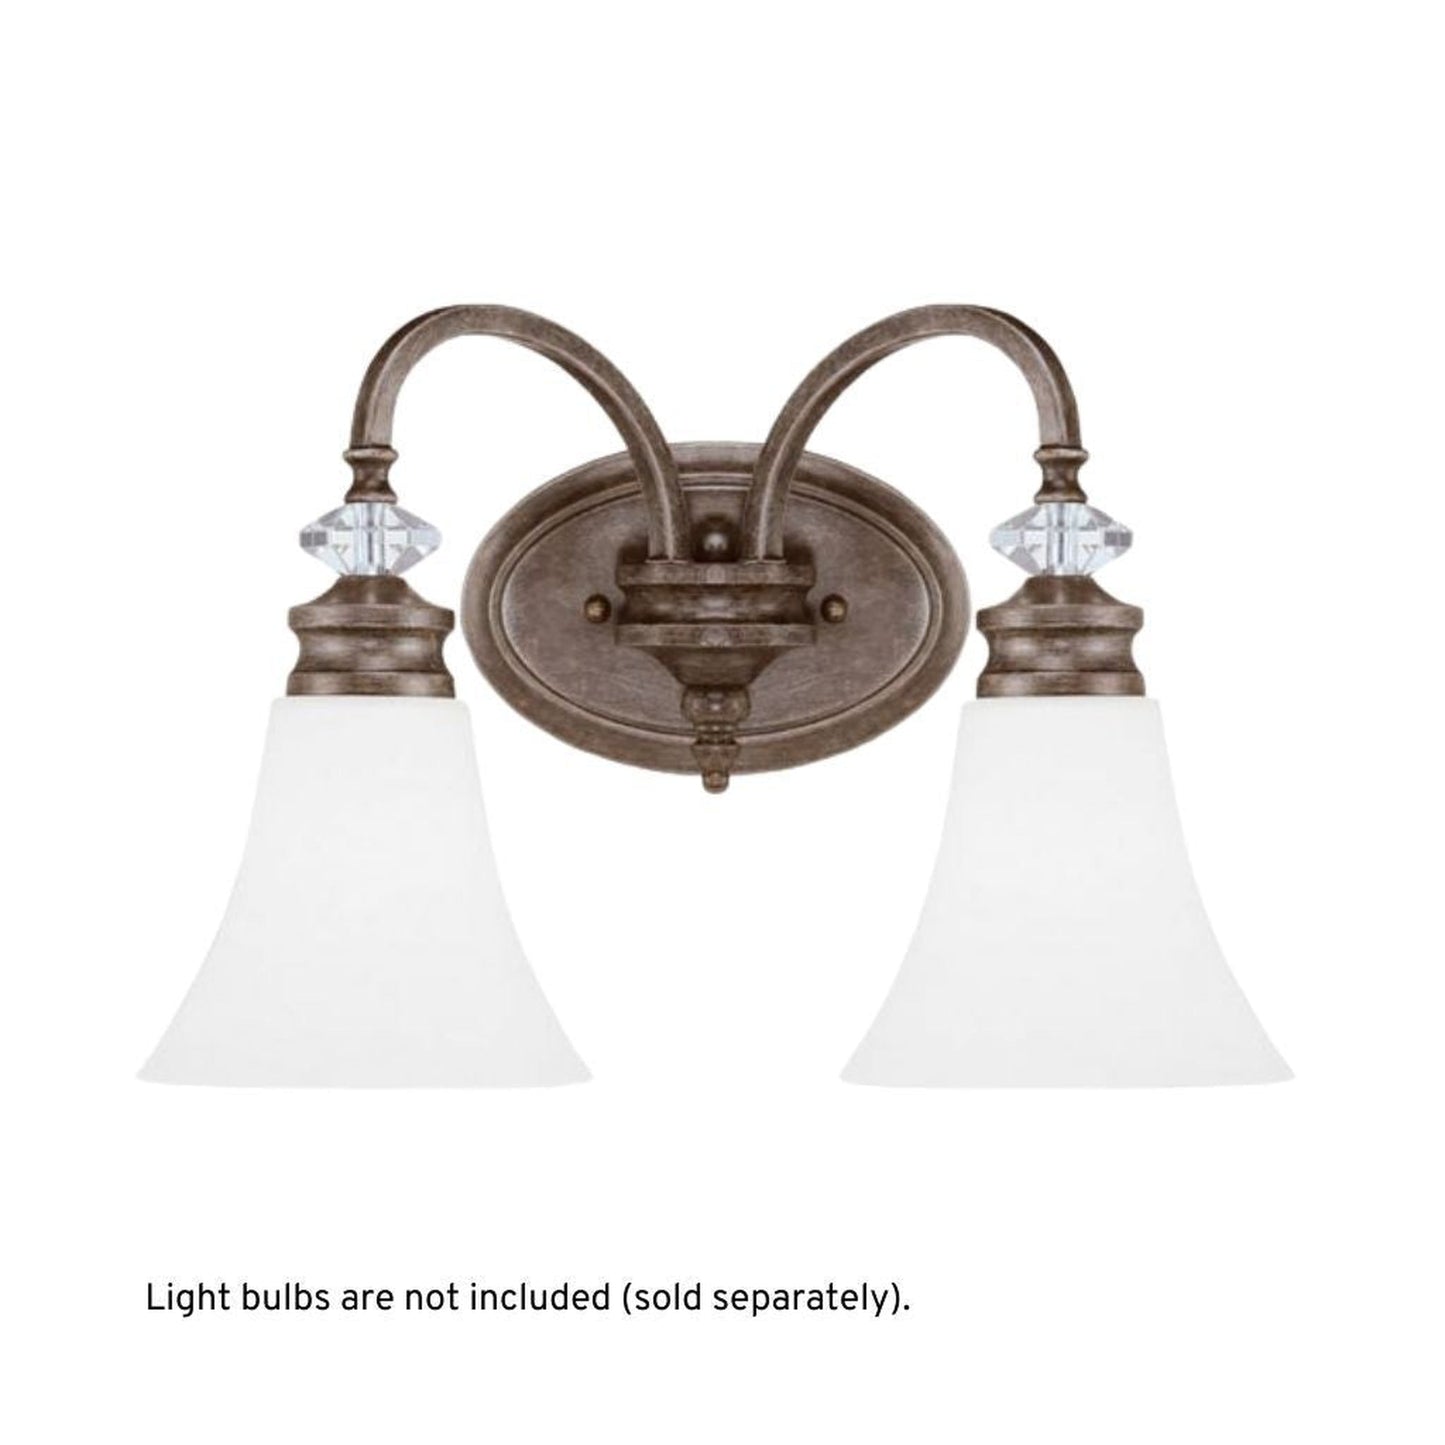 Craftmade Boulevard 17" 2-Light Mocha Bronze Wash Vanity Light With White Frosted Glass Shade